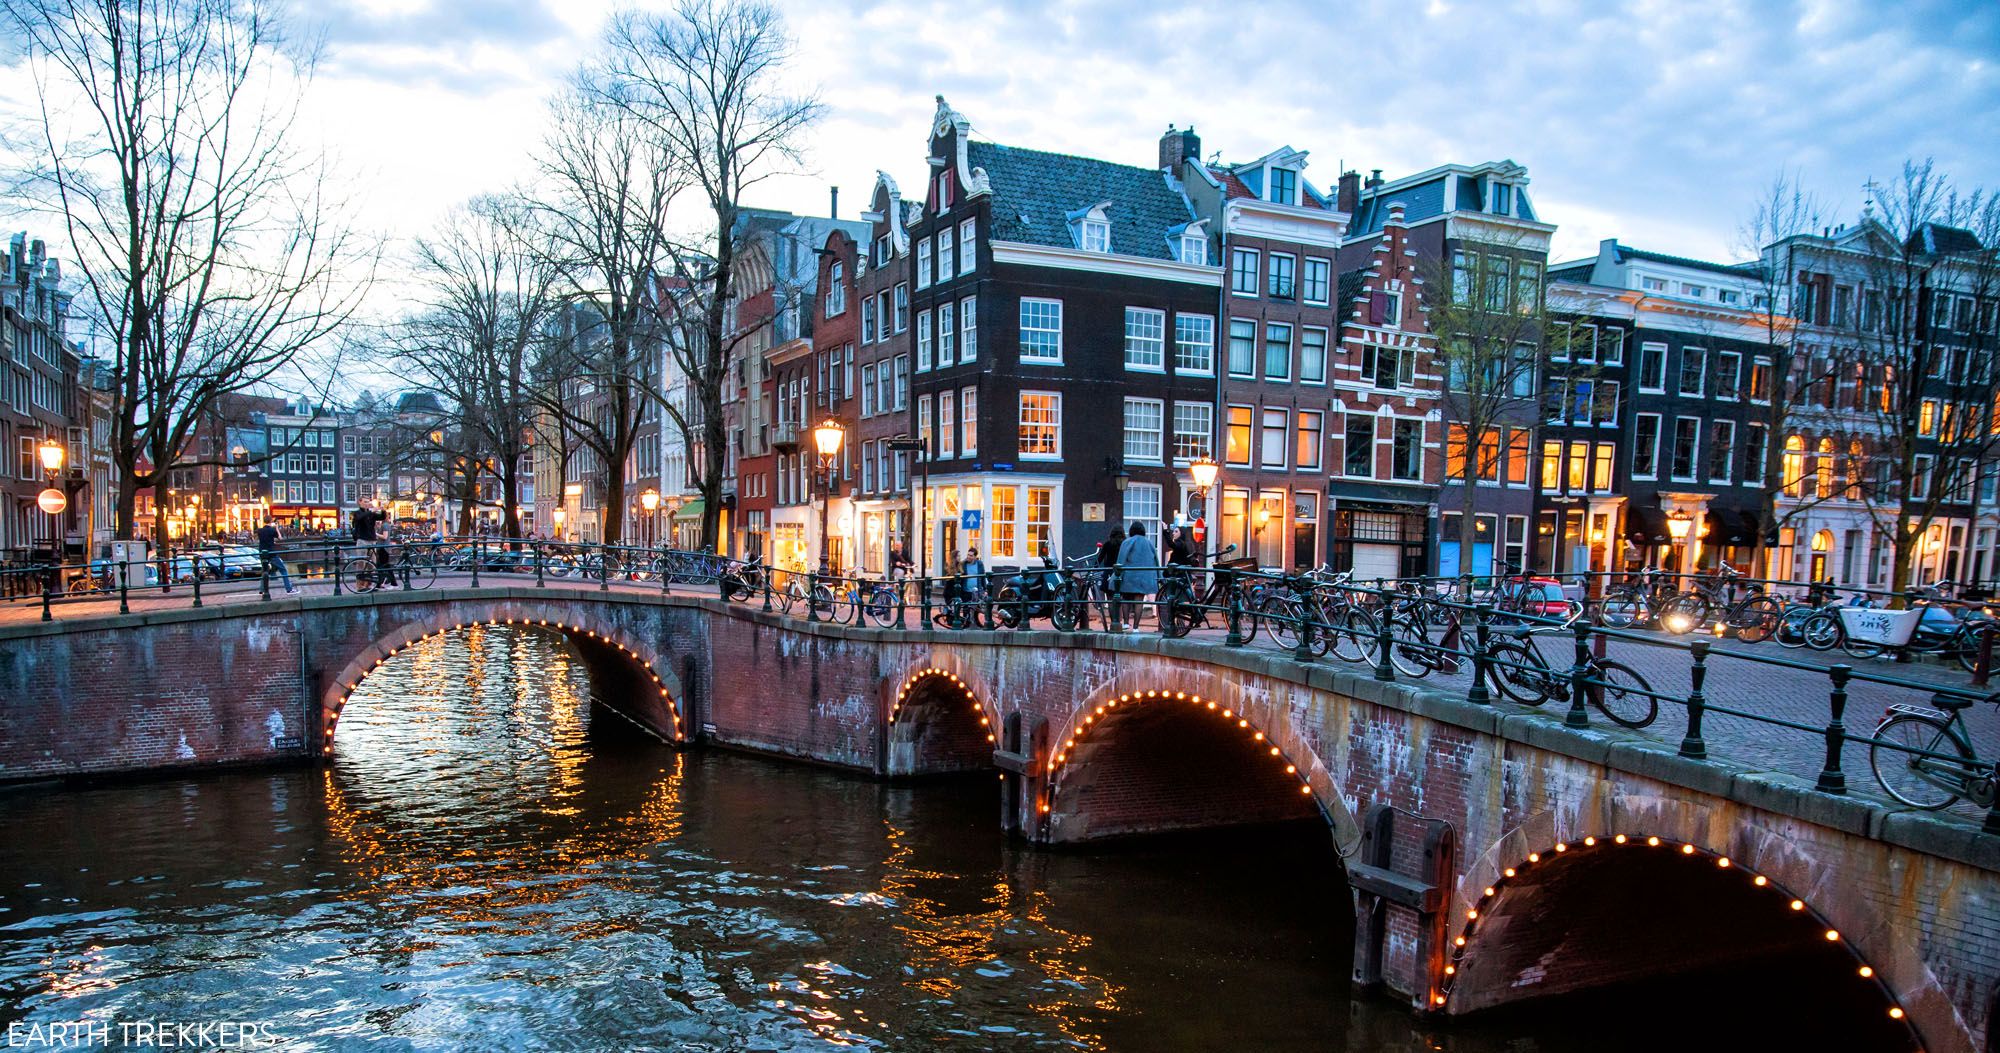 Featured image for “Amsterdam Bucket List: Top 10 Things to do in Amsterdam”